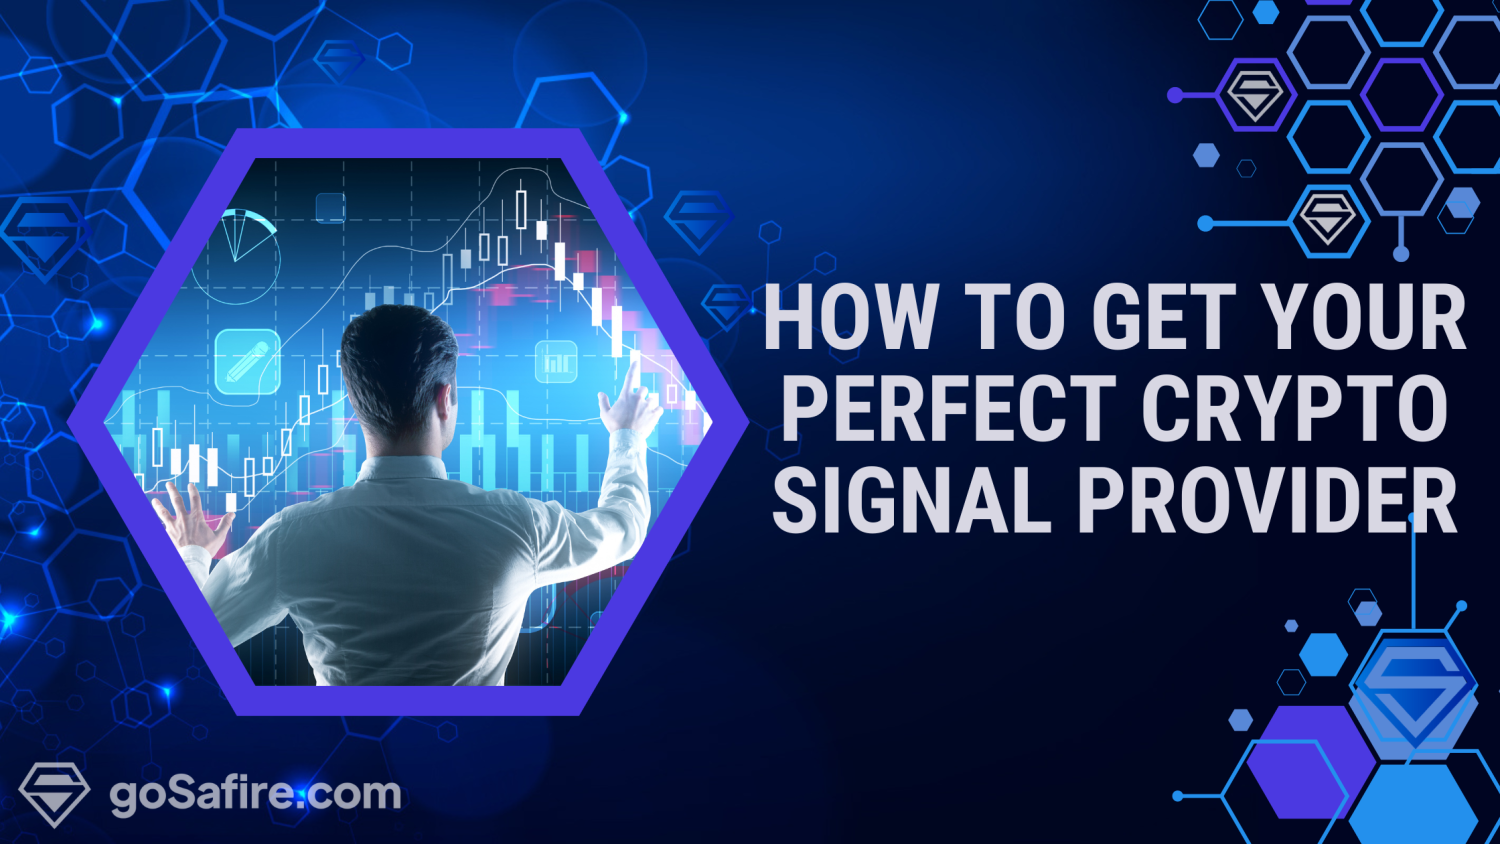 GoSafire review how to choose your crypto signal provider